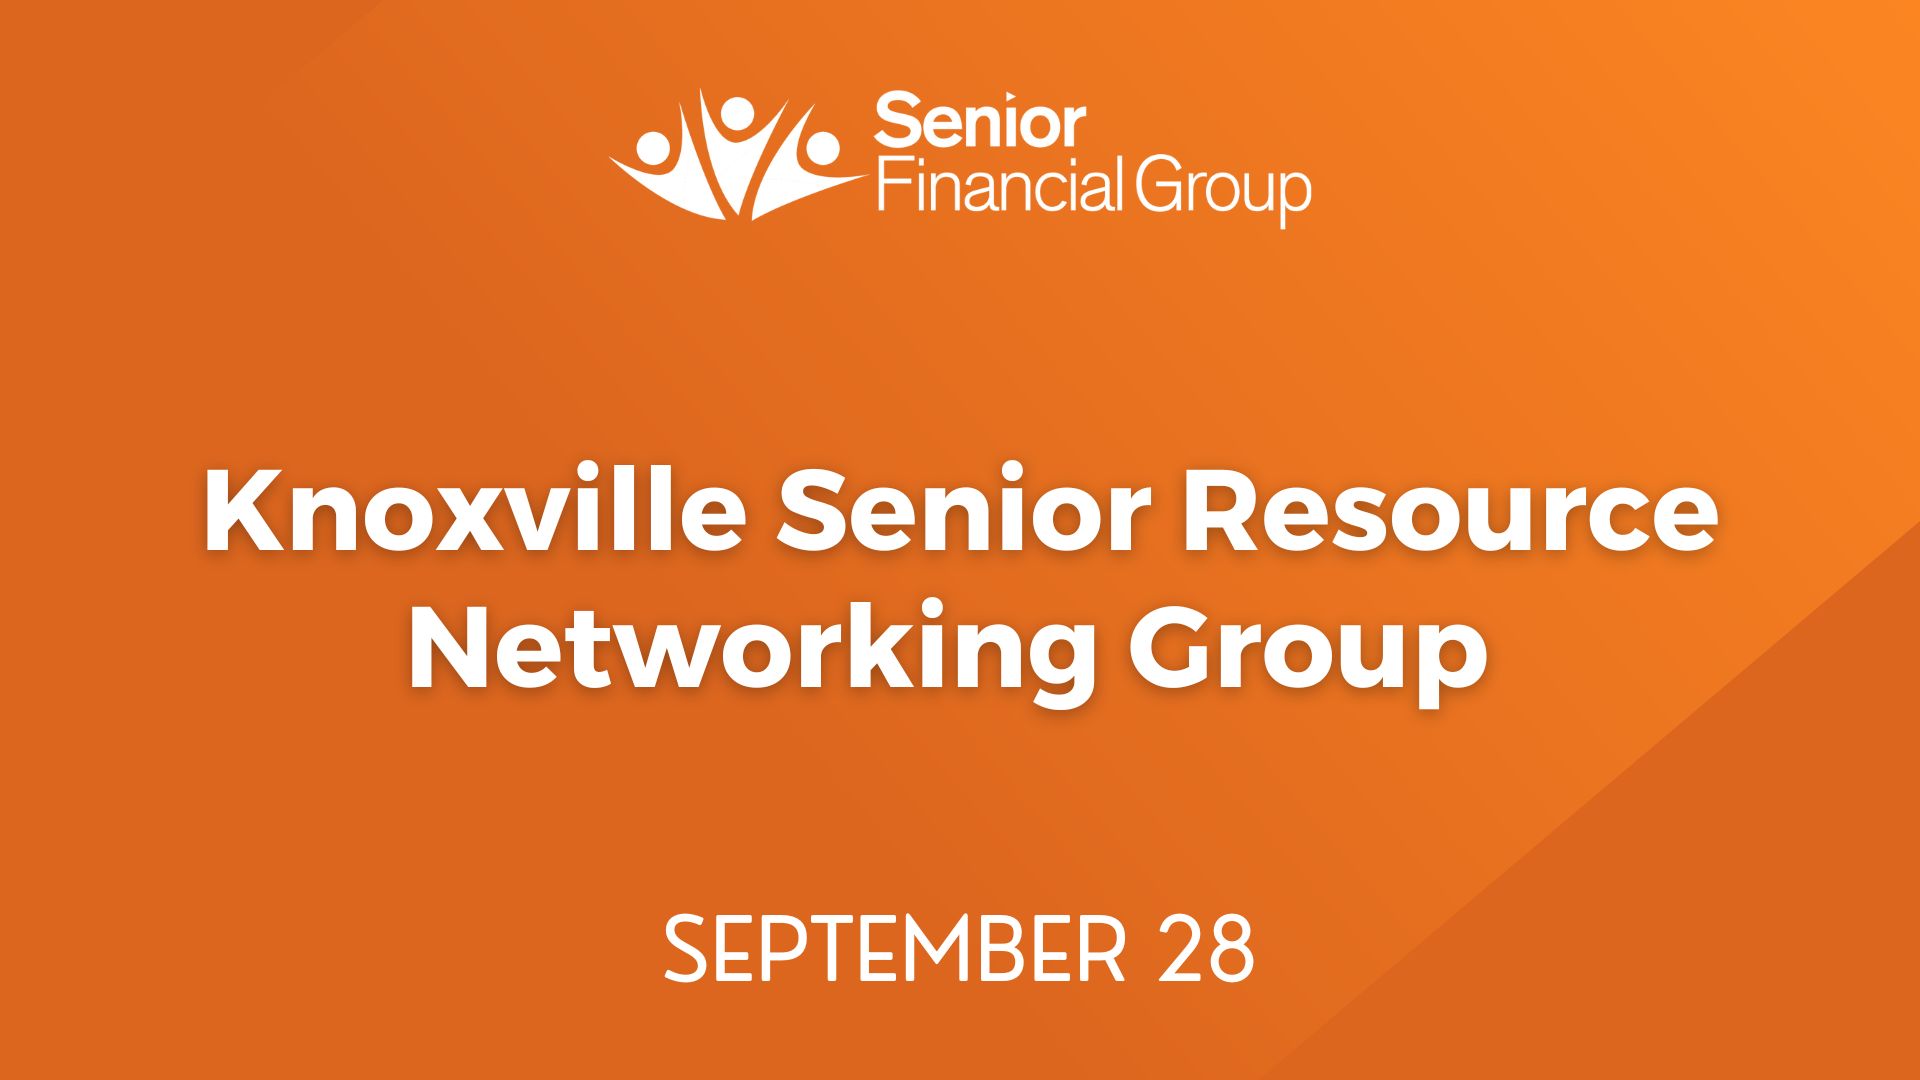 Knoxville Senior Resource Networking